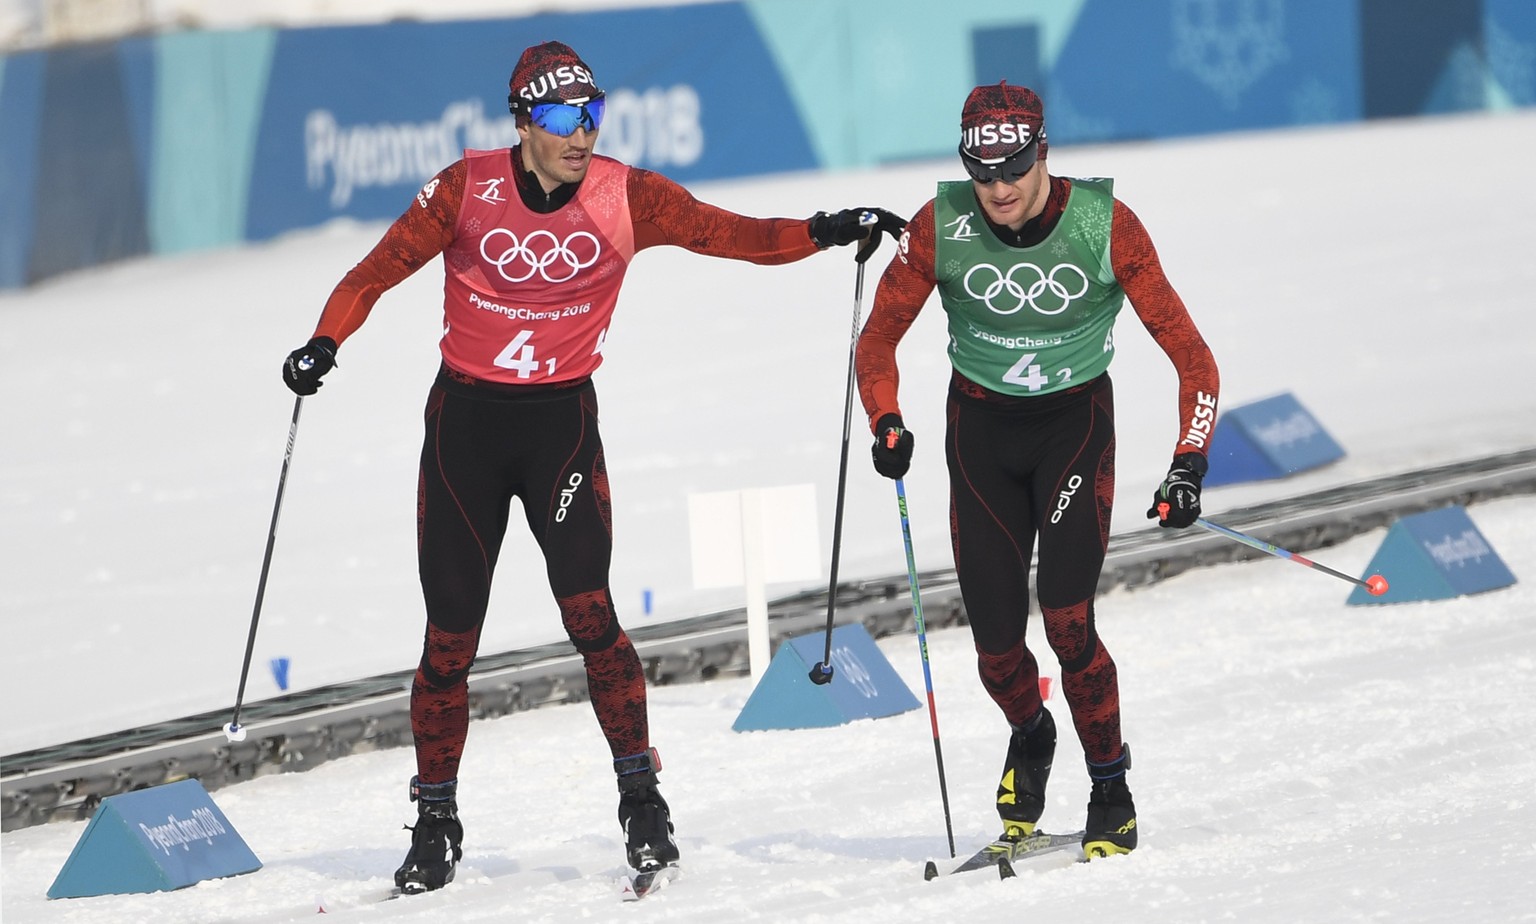 epa06538655 Dario Cologna (R) and Jonas Baumann of Switzerland in action during the Men&#039;s Cross Country 4 x 10 km Relay race at the Alpensia Cross Country Centre during the PyeongChang 2018 Olymp ...